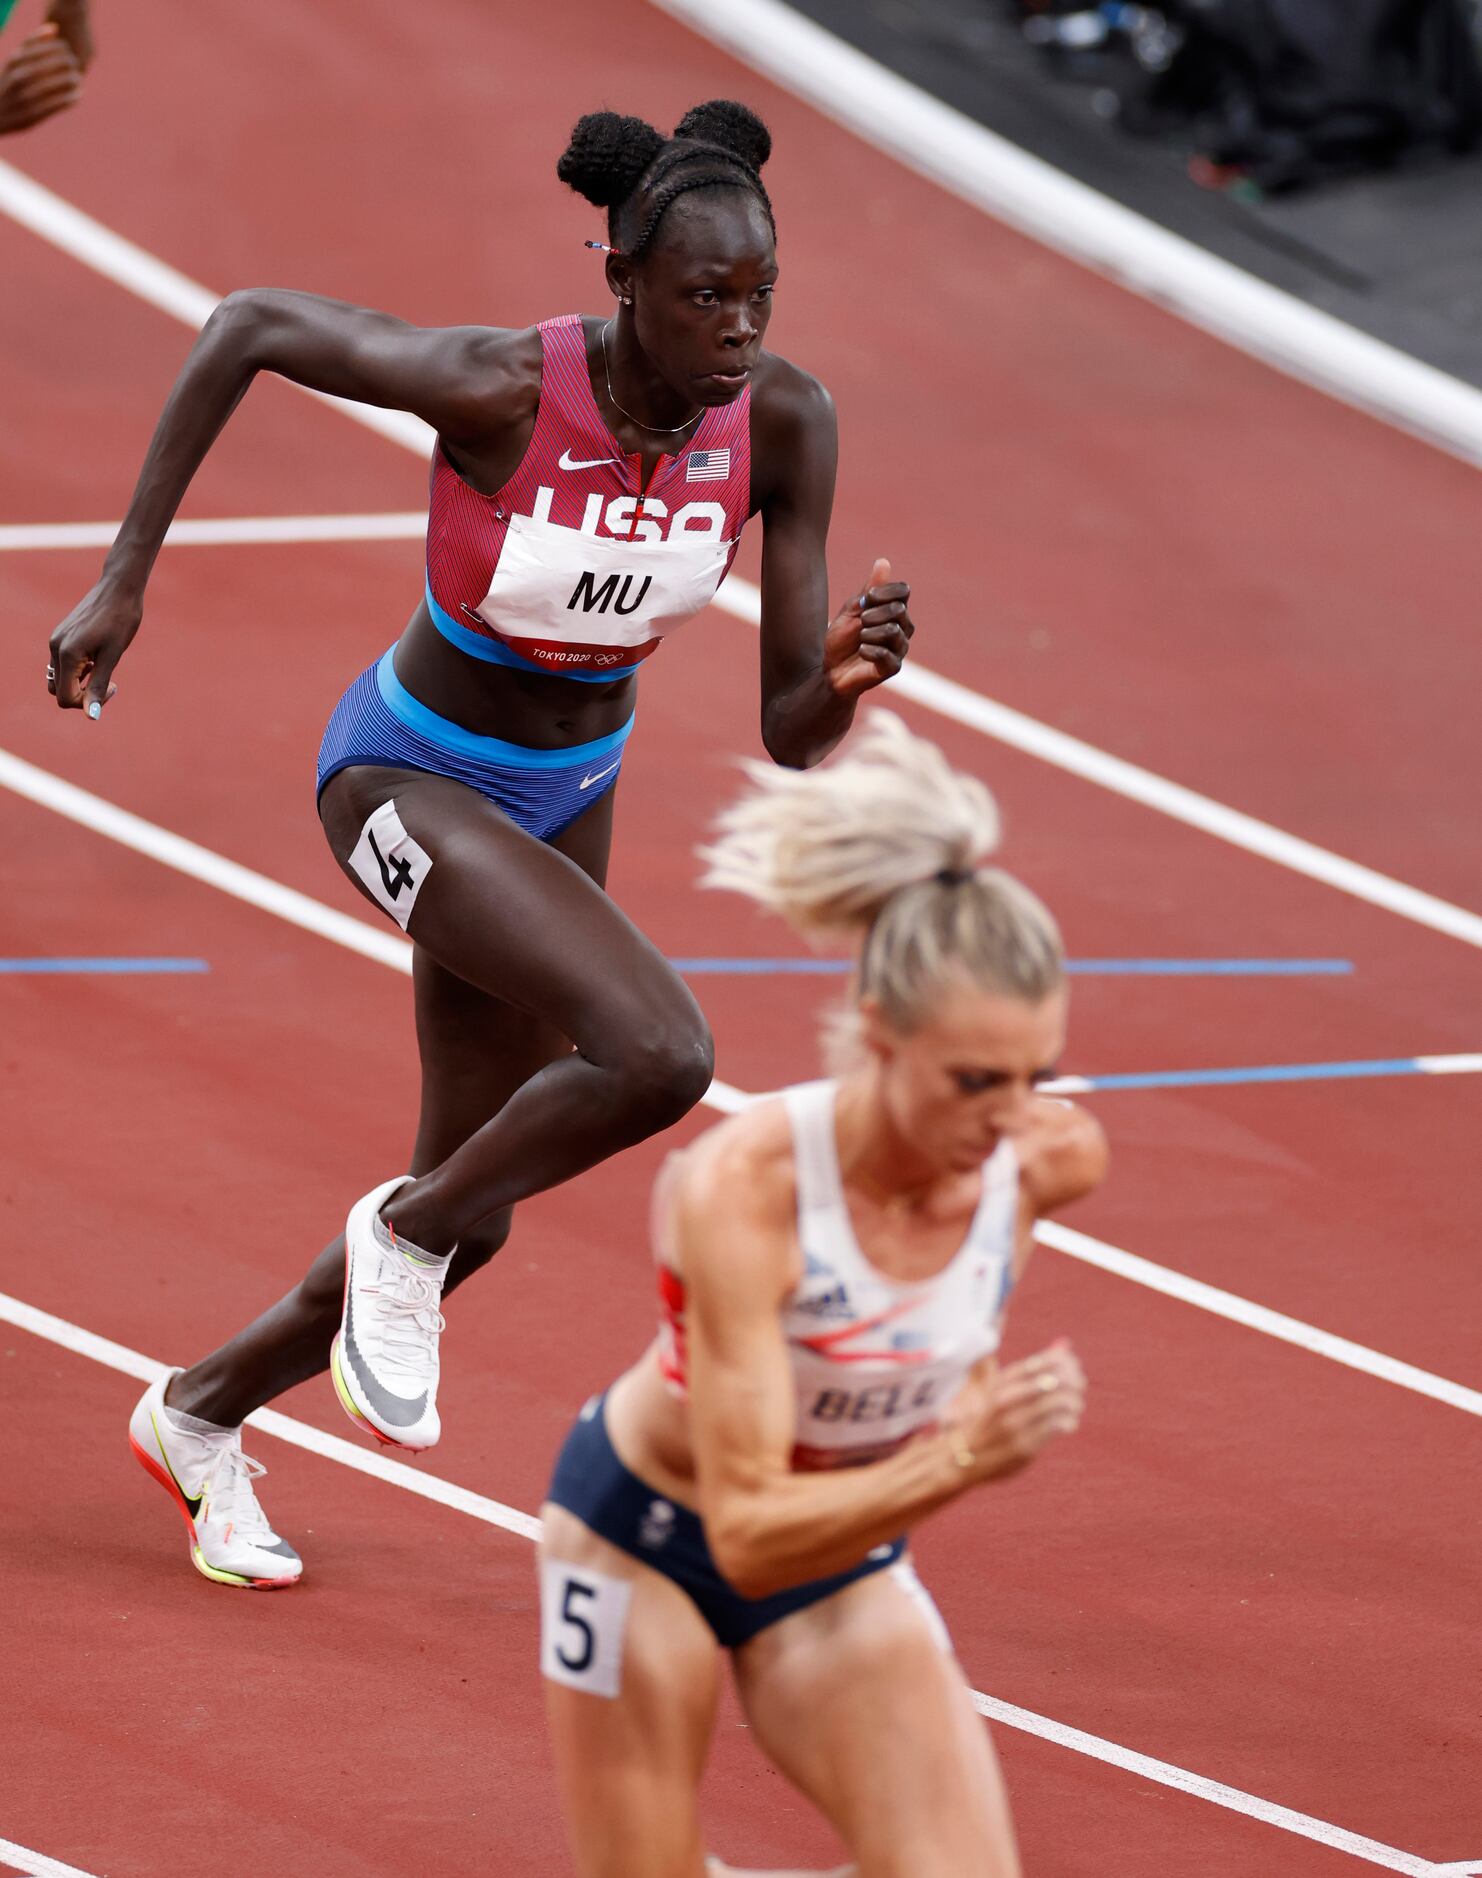 USA’s Athing Mu competes in the women’s 800 meter semifinal race during the postponed 2020...